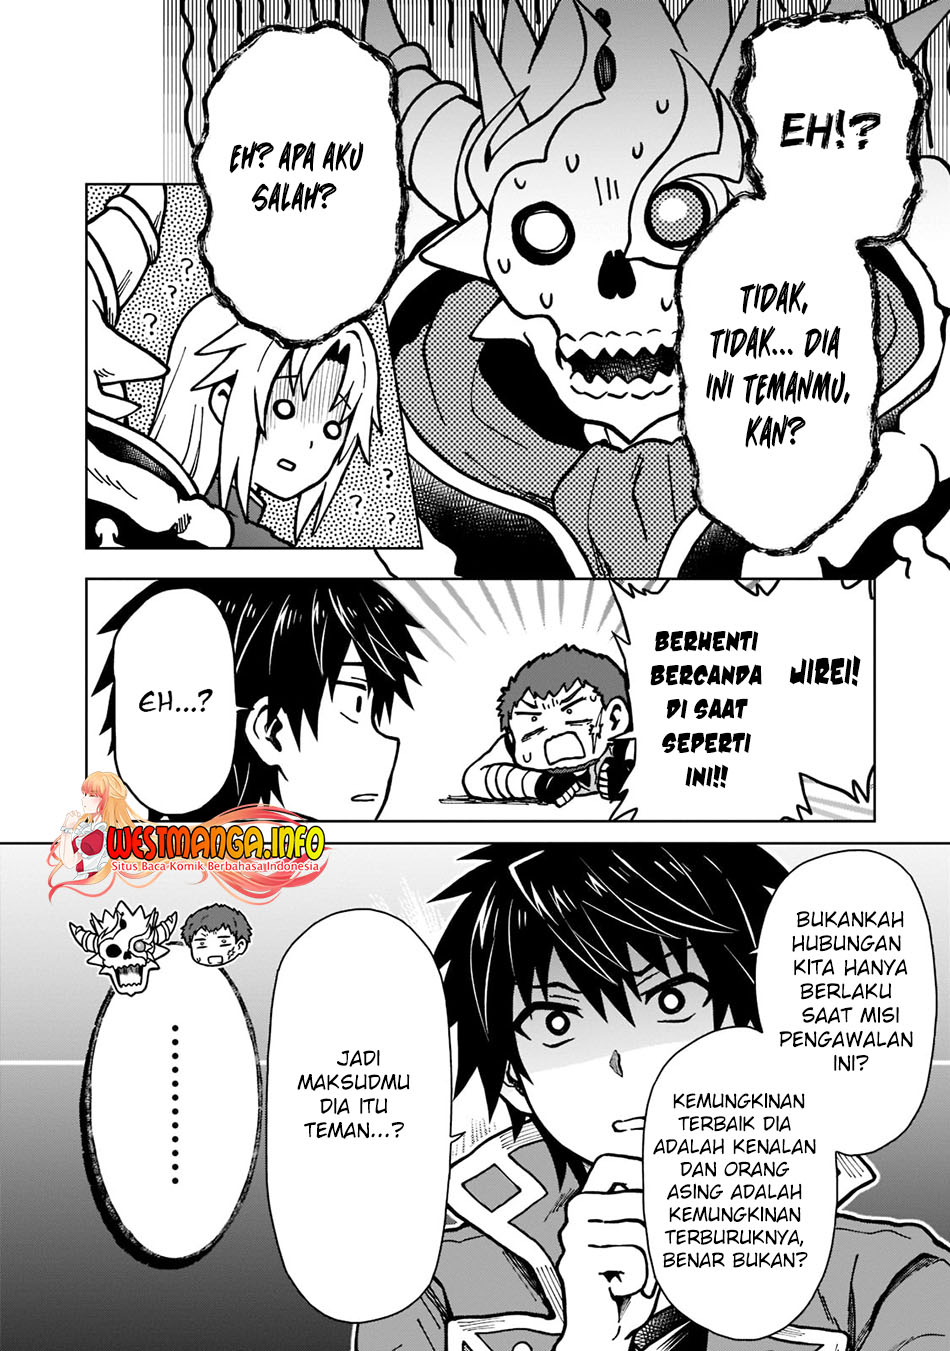 Dilarang COPAS - situs resmi www.mangacanblog.com - Komik d rank adventurer invited by a brave party and the stalking princess 011 - chapter 11 12 Indonesia d rank adventurer invited by a brave party and the stalking princess 011 - chapter 11 Terbaru 9|Baca Manga Komik Indonesia|Mangacan